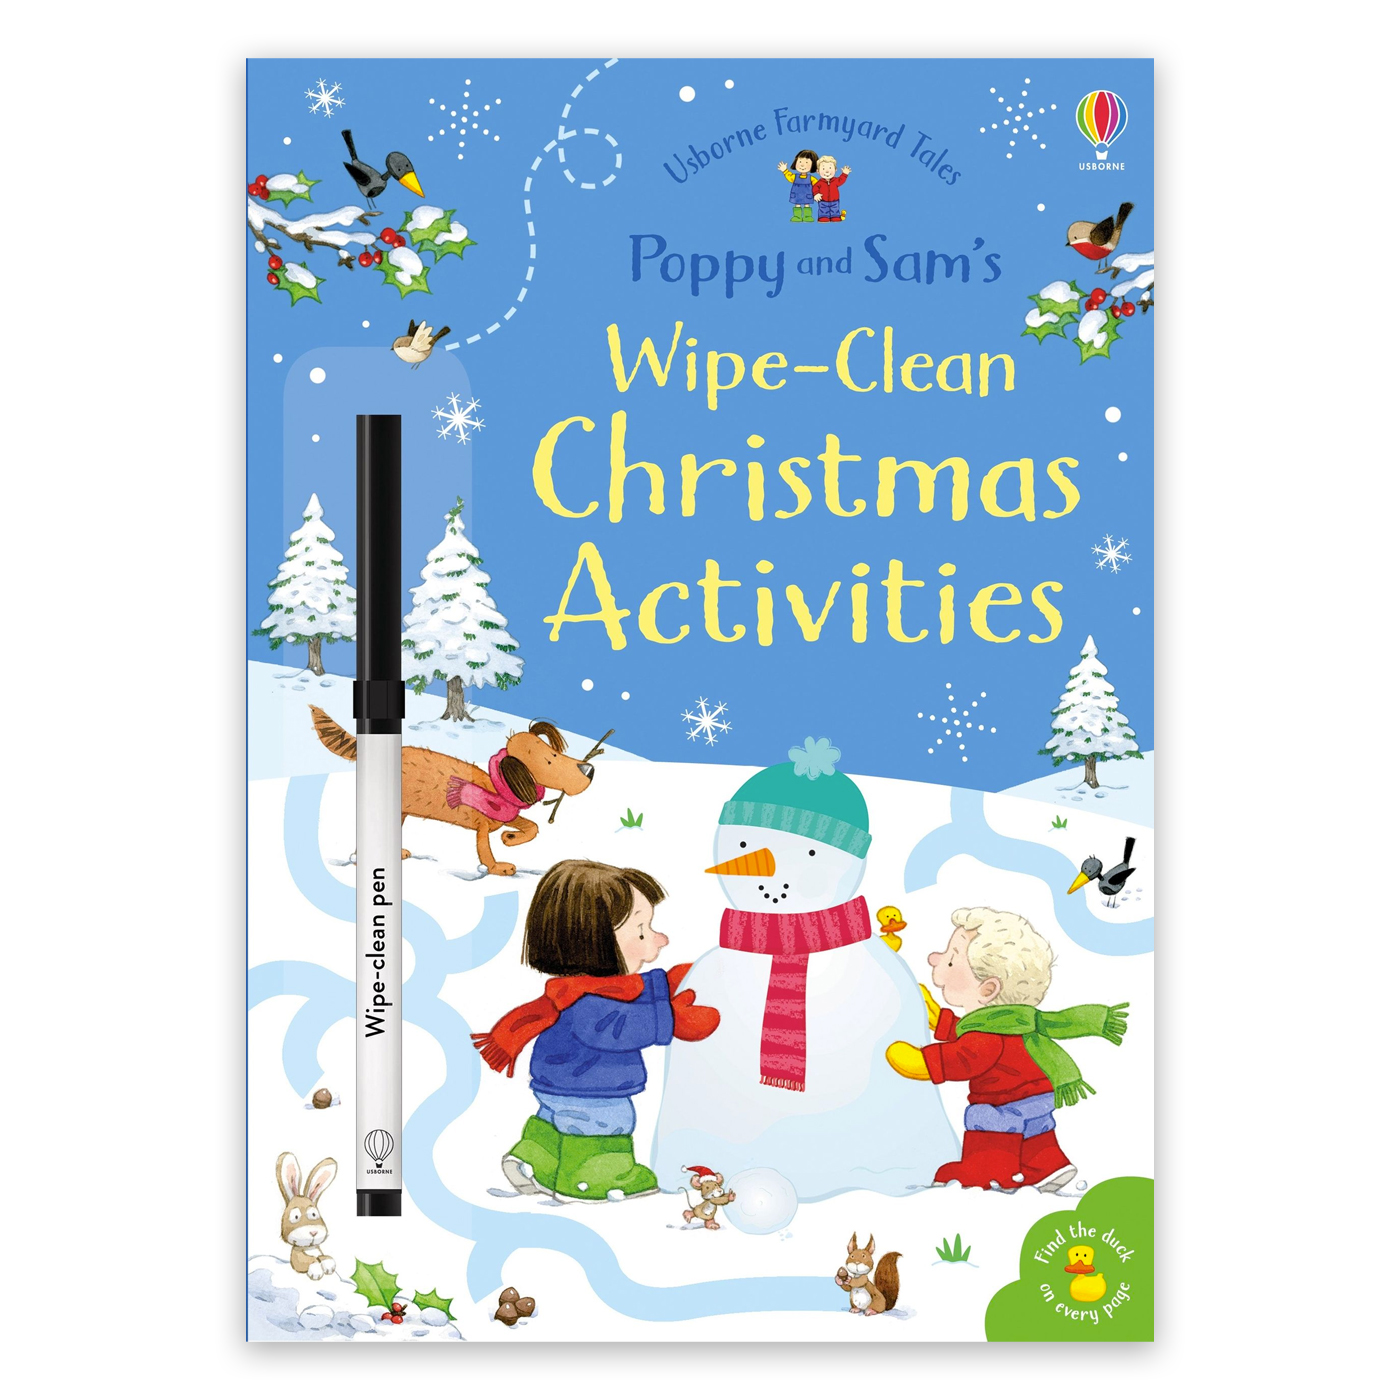  Poppy and Sam's Wipe-Clean Christmas Activities